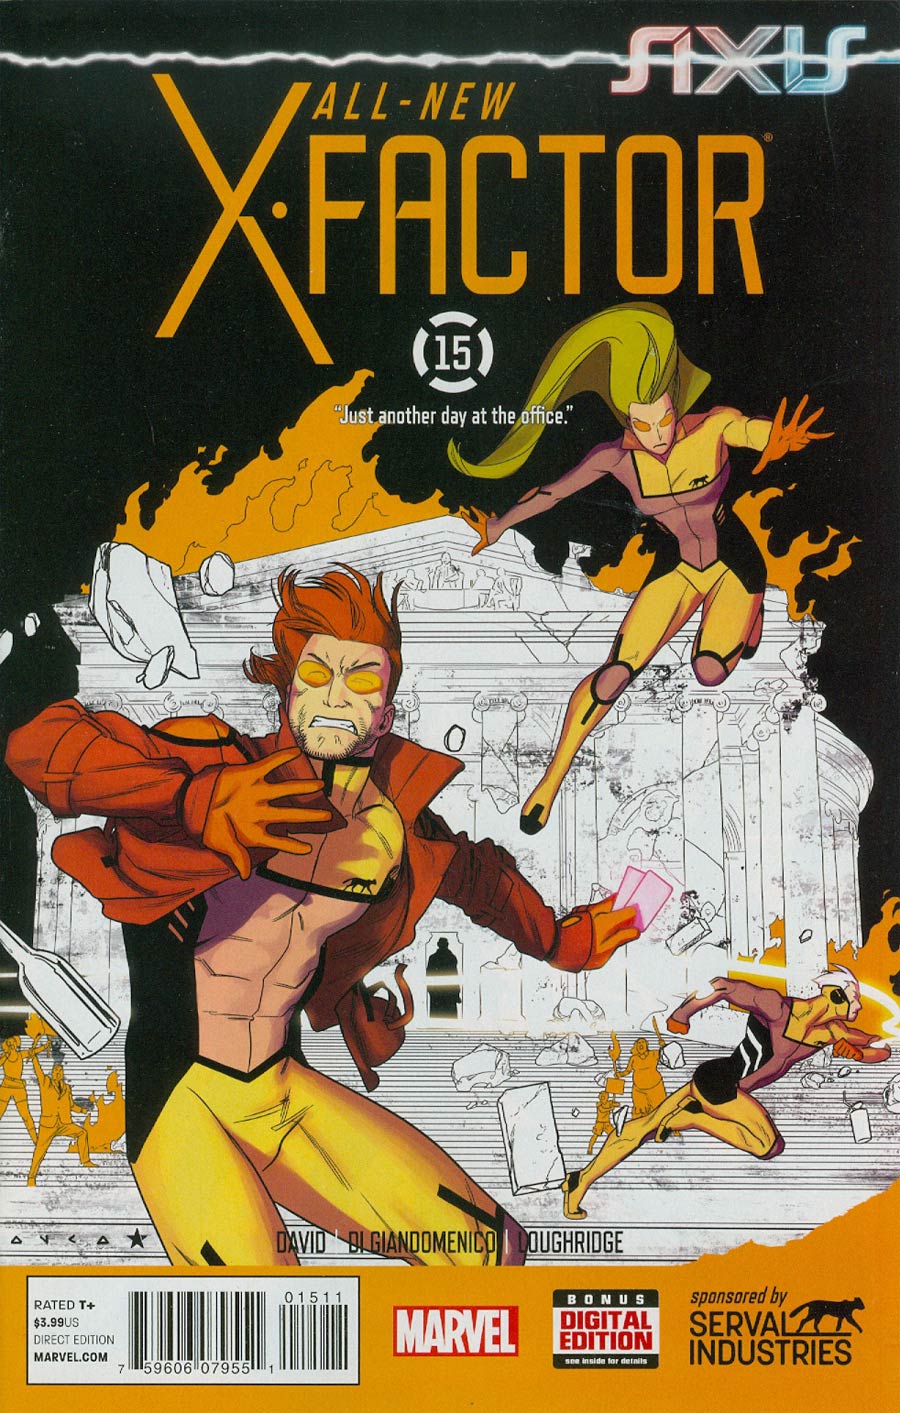 All-New X-Factor #15 (AXIS Tie-In)